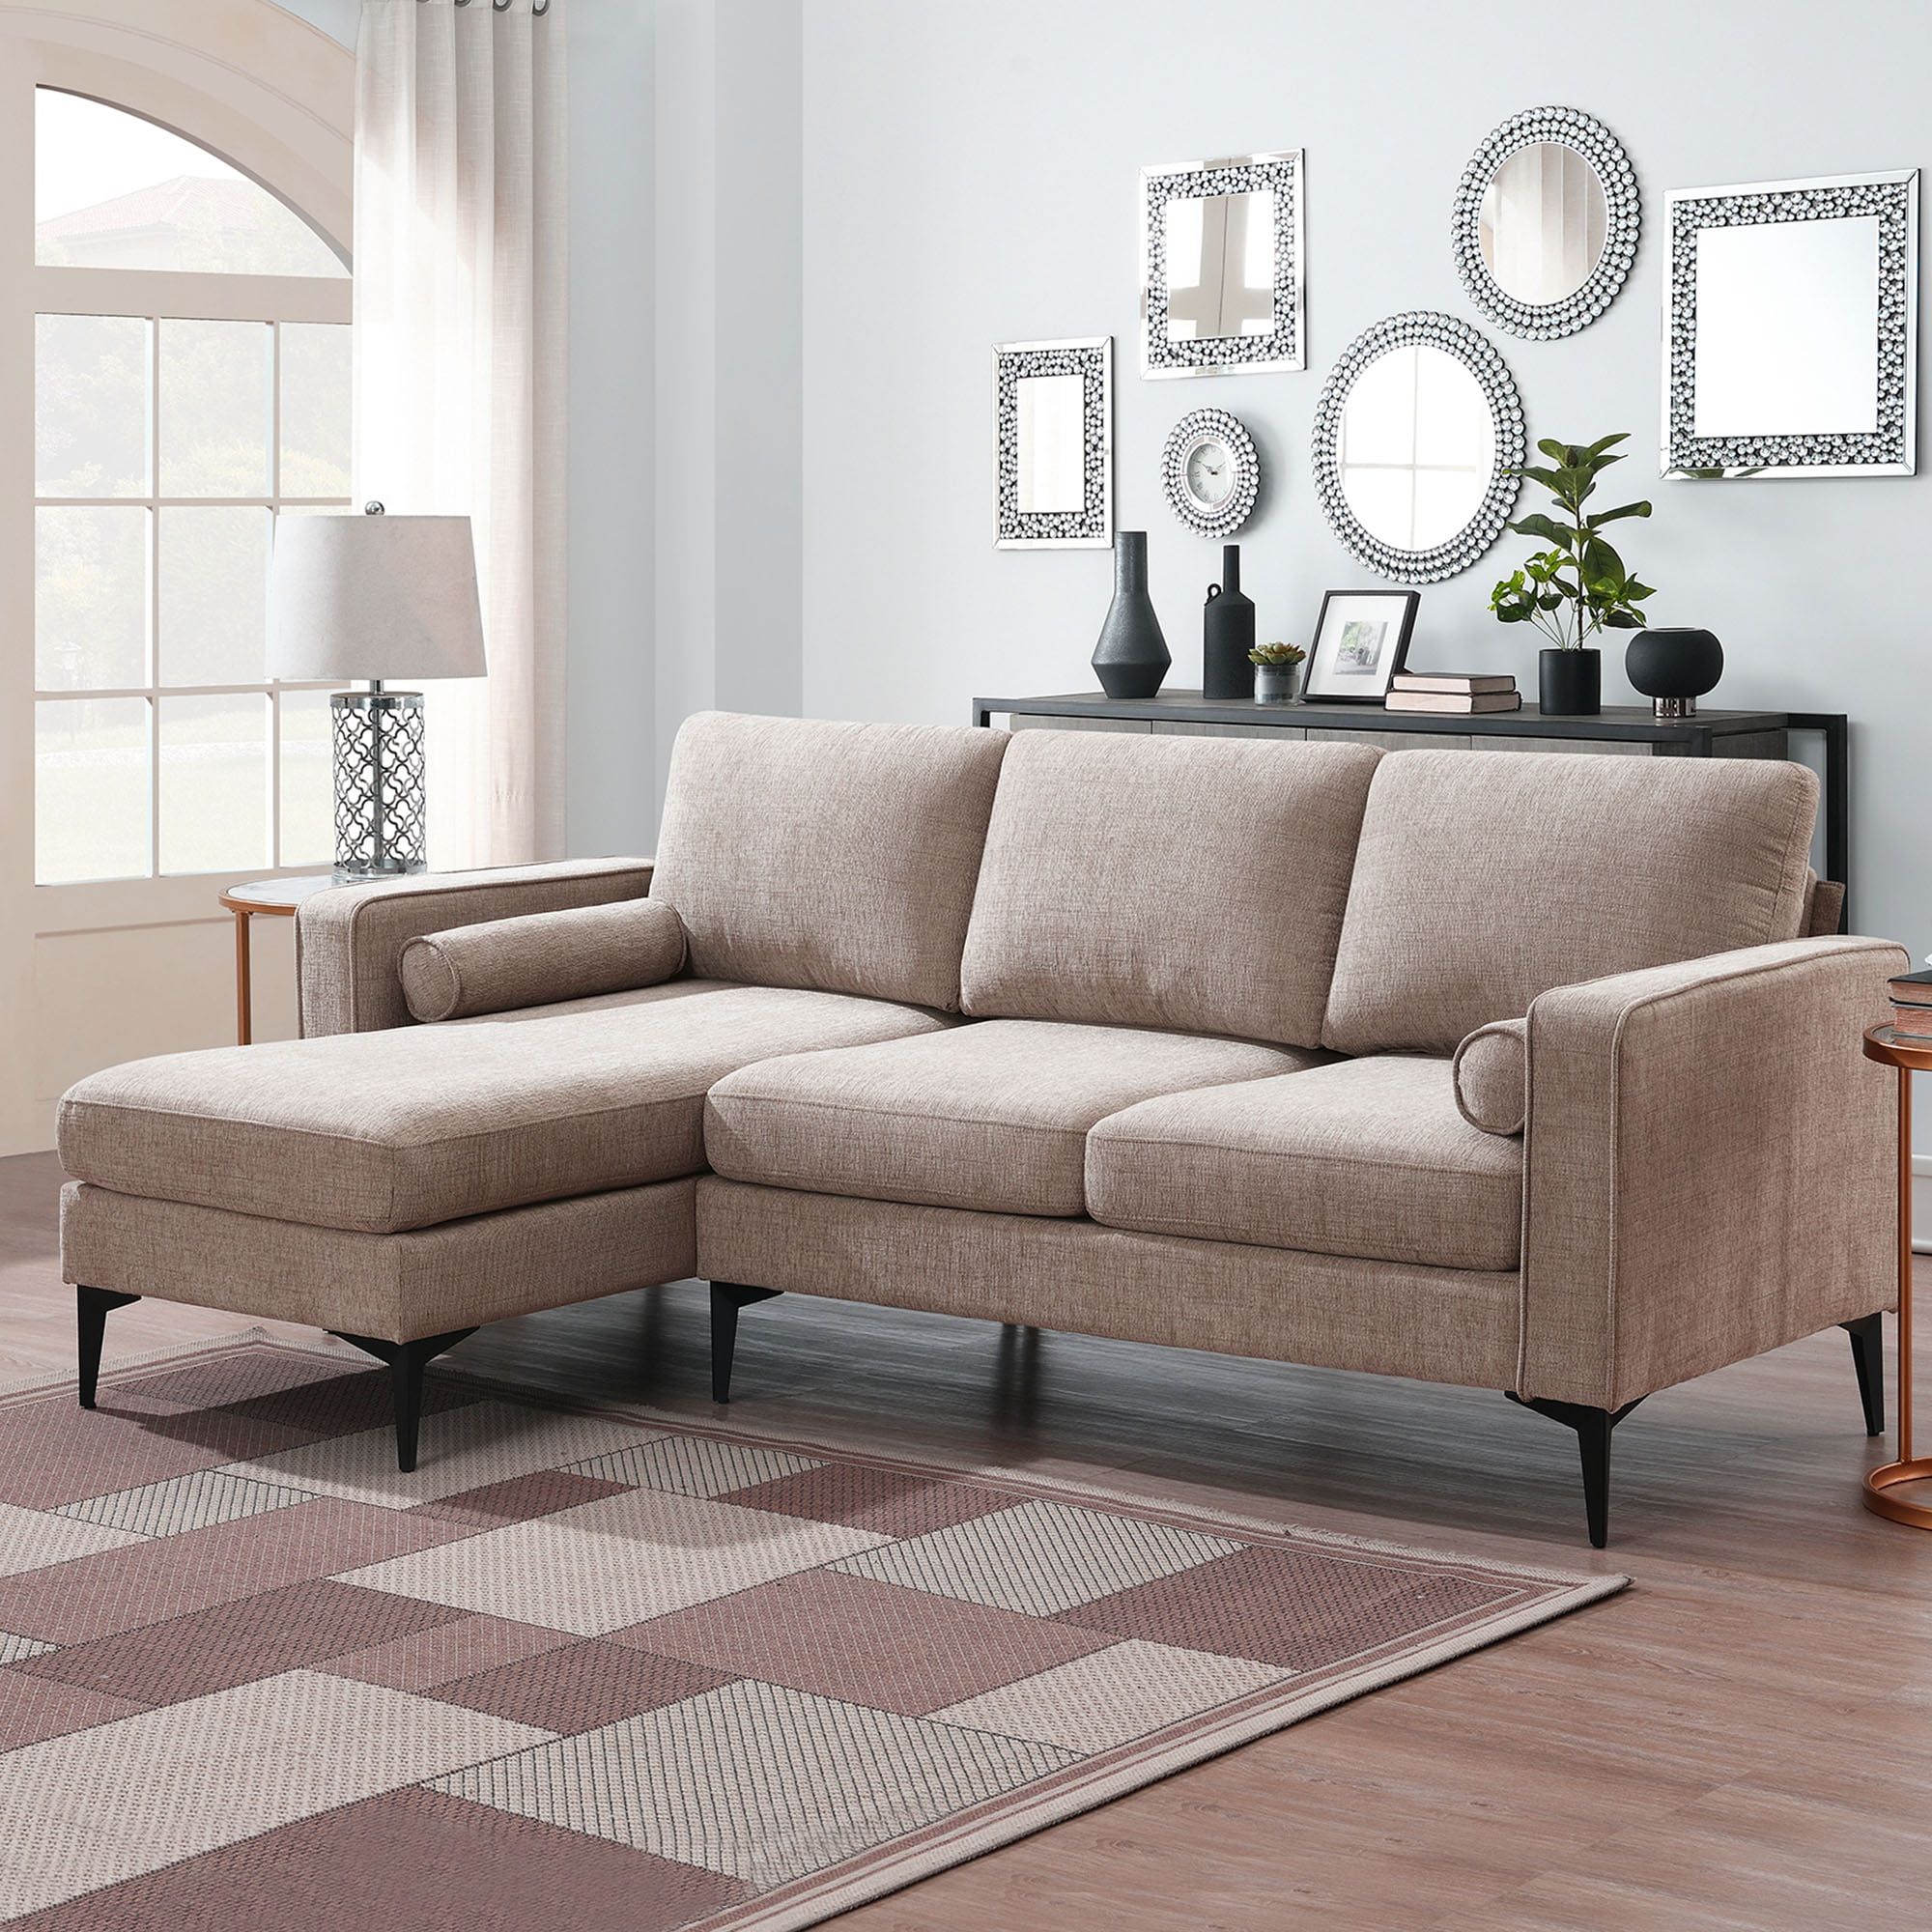 L Shaped Couch, 4 Seater Sectional Couch With Chaise And 2 Pillows, Modern  L Shaped Corner Couch, Heavy Duty Upholstered Sectional Couch, Kamida Sectional  Couch Furniture For Living Room, Light Brown – Walmart Within Heavy Duty Sectional Couches (View 5 of 15)